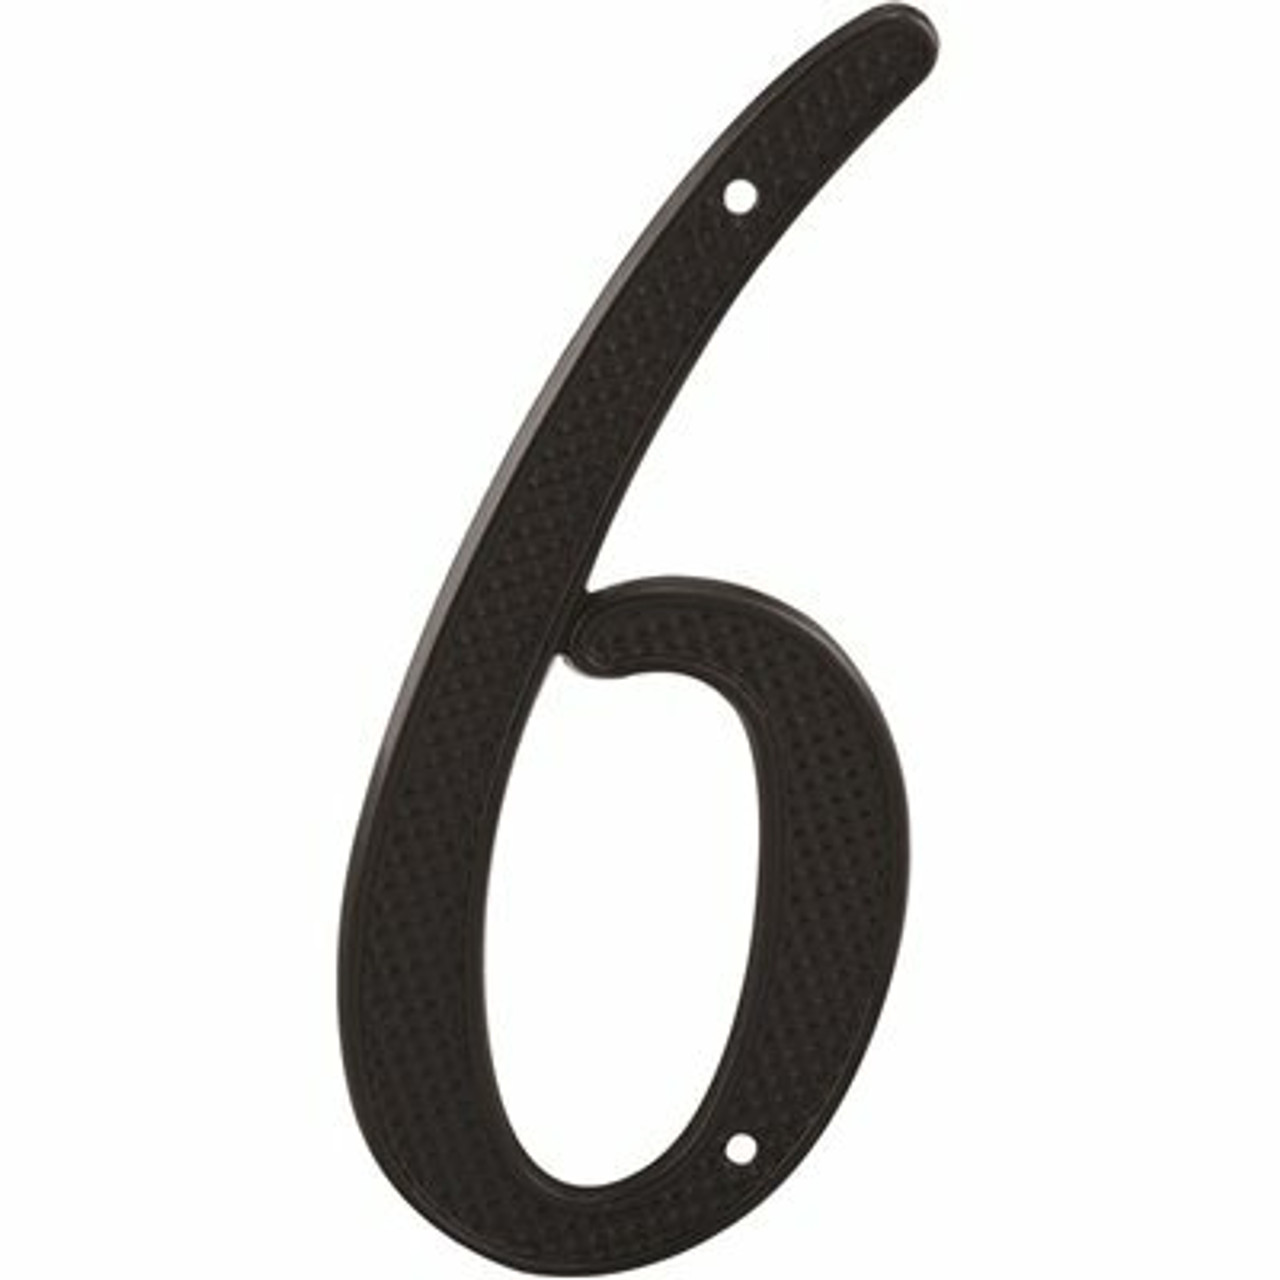 Prime-Line 4 In. Black Metal House Number 6 Or Number 9 With Nails (2-Pack)